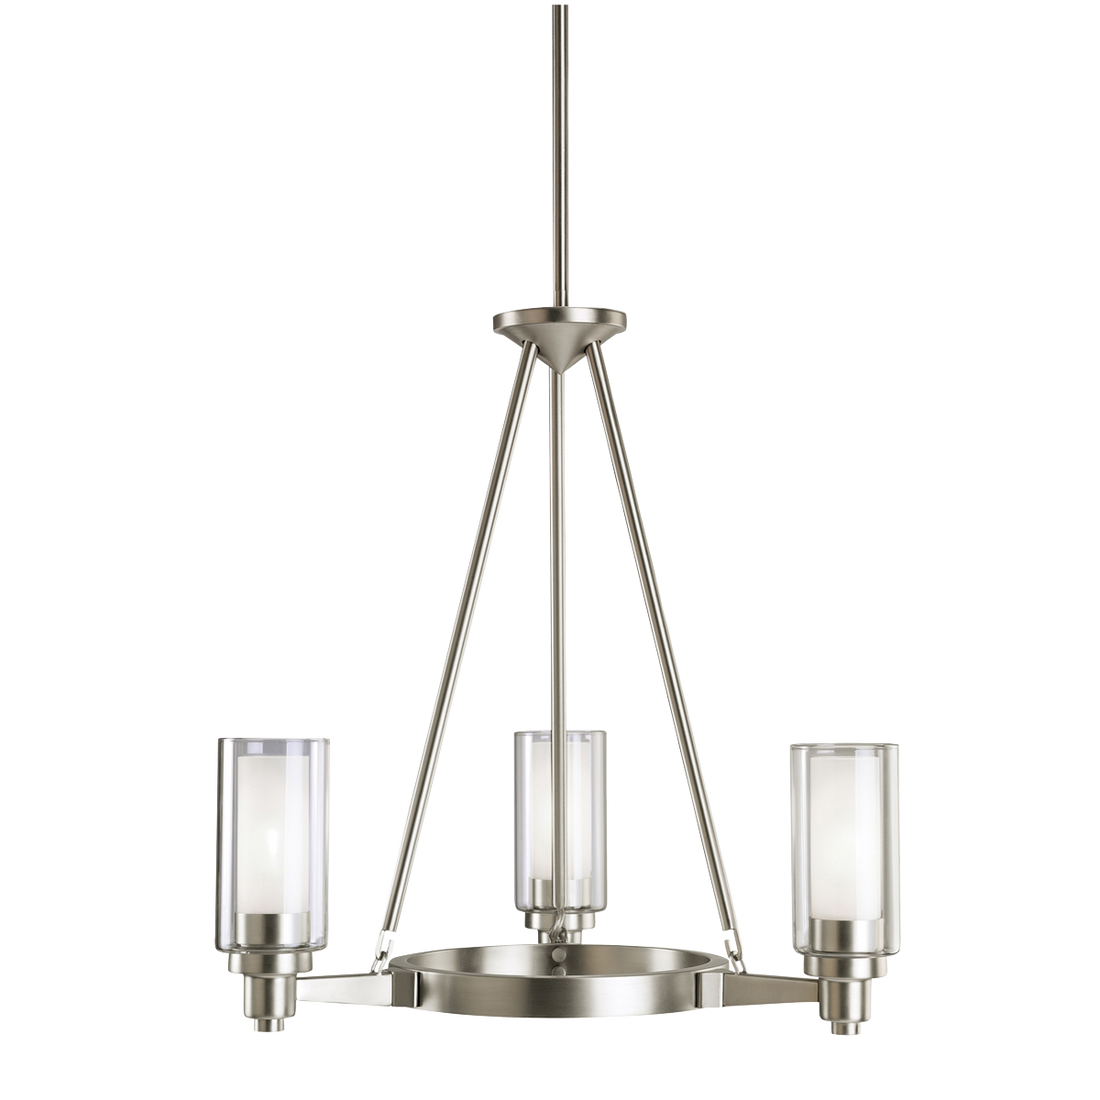 Circolo 3-Light Chandelier in Brushed Nickel, by Kichler, 2343NI